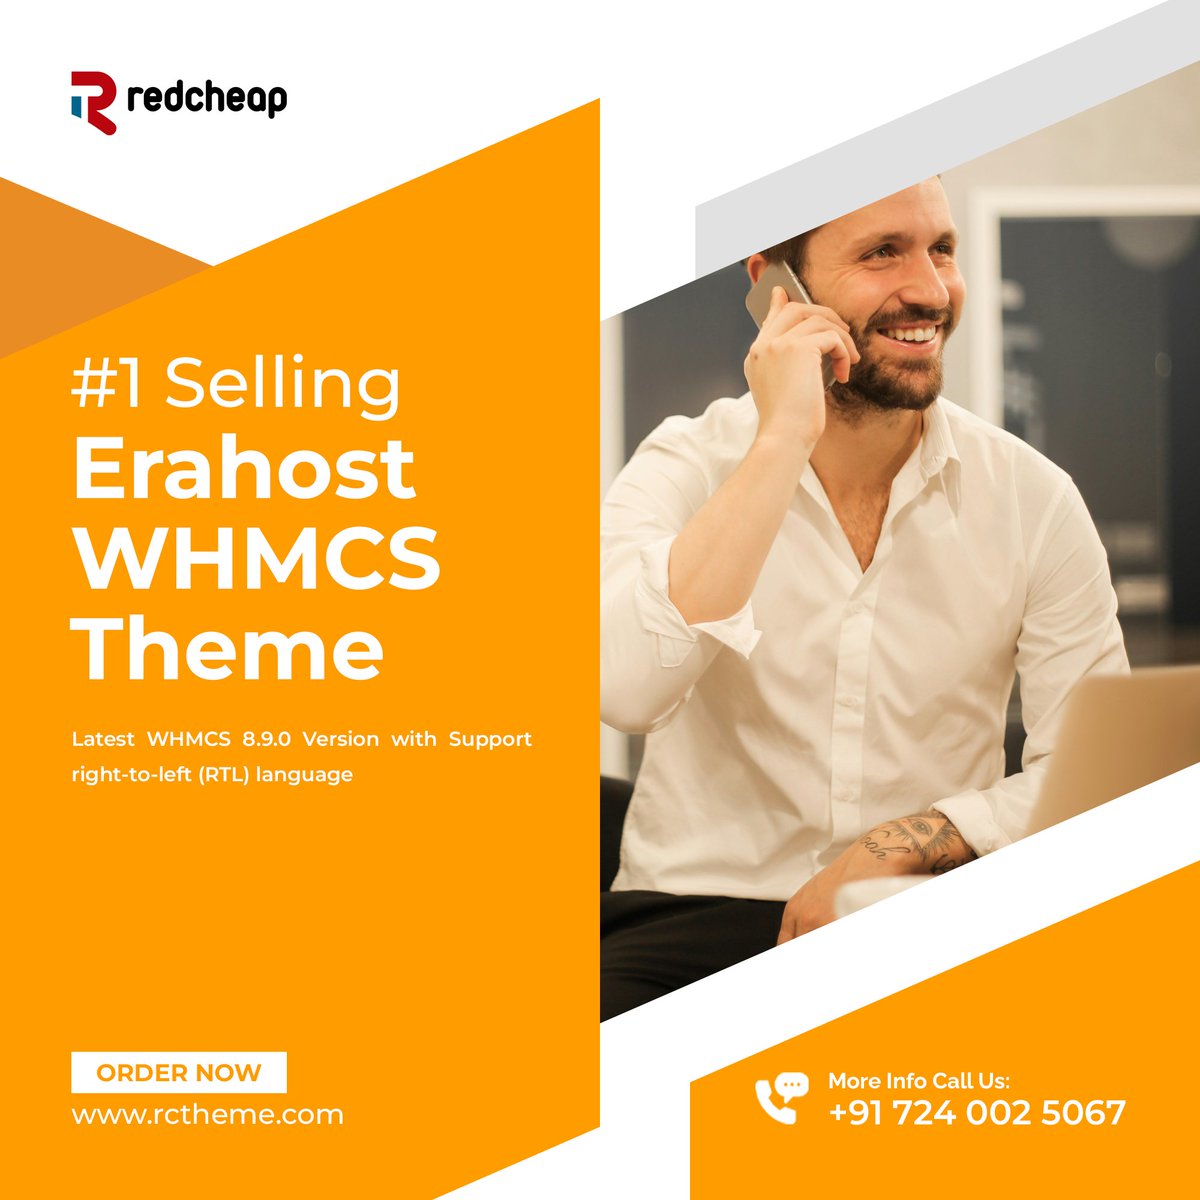 🌟 Experience Multicultural Excellence with Erahost WHMCS Theme! 🌍✨
Bridges languages and cultures, offering seamless hosting solutions in both English and Arabic! 🚀🌐
🌟 Included Languages:
🇬🇧 English
🇸🇦 Arabic
#WHMCS #WebHosting #Erahost #Theme #Multilingual #GlobalPresence